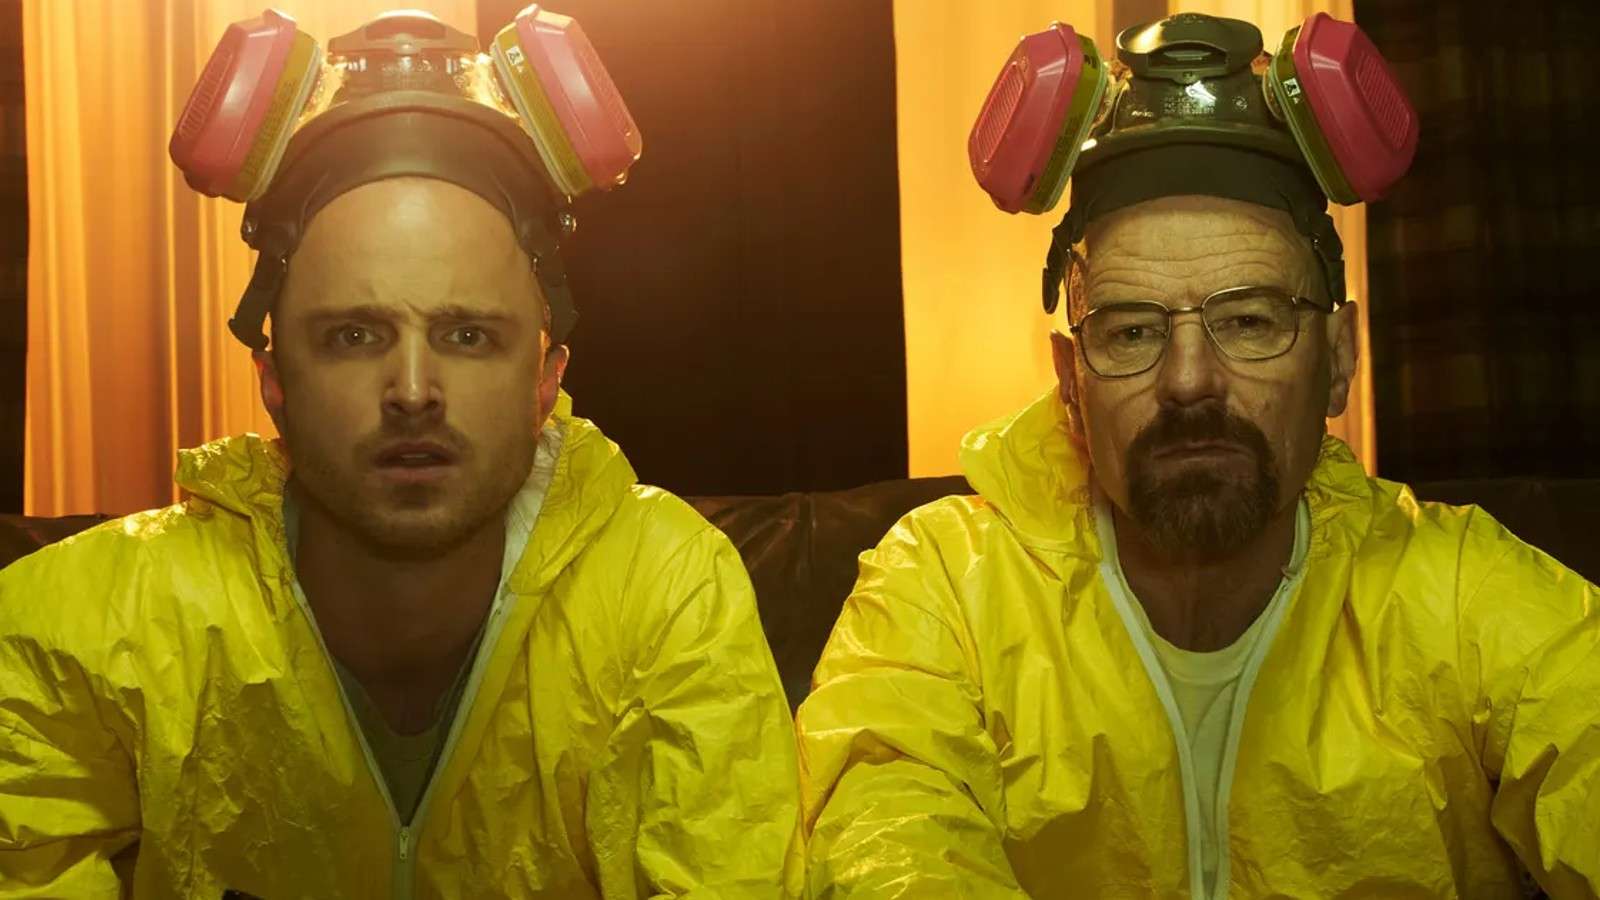 The Breaking Bad duo in their cooking gear.